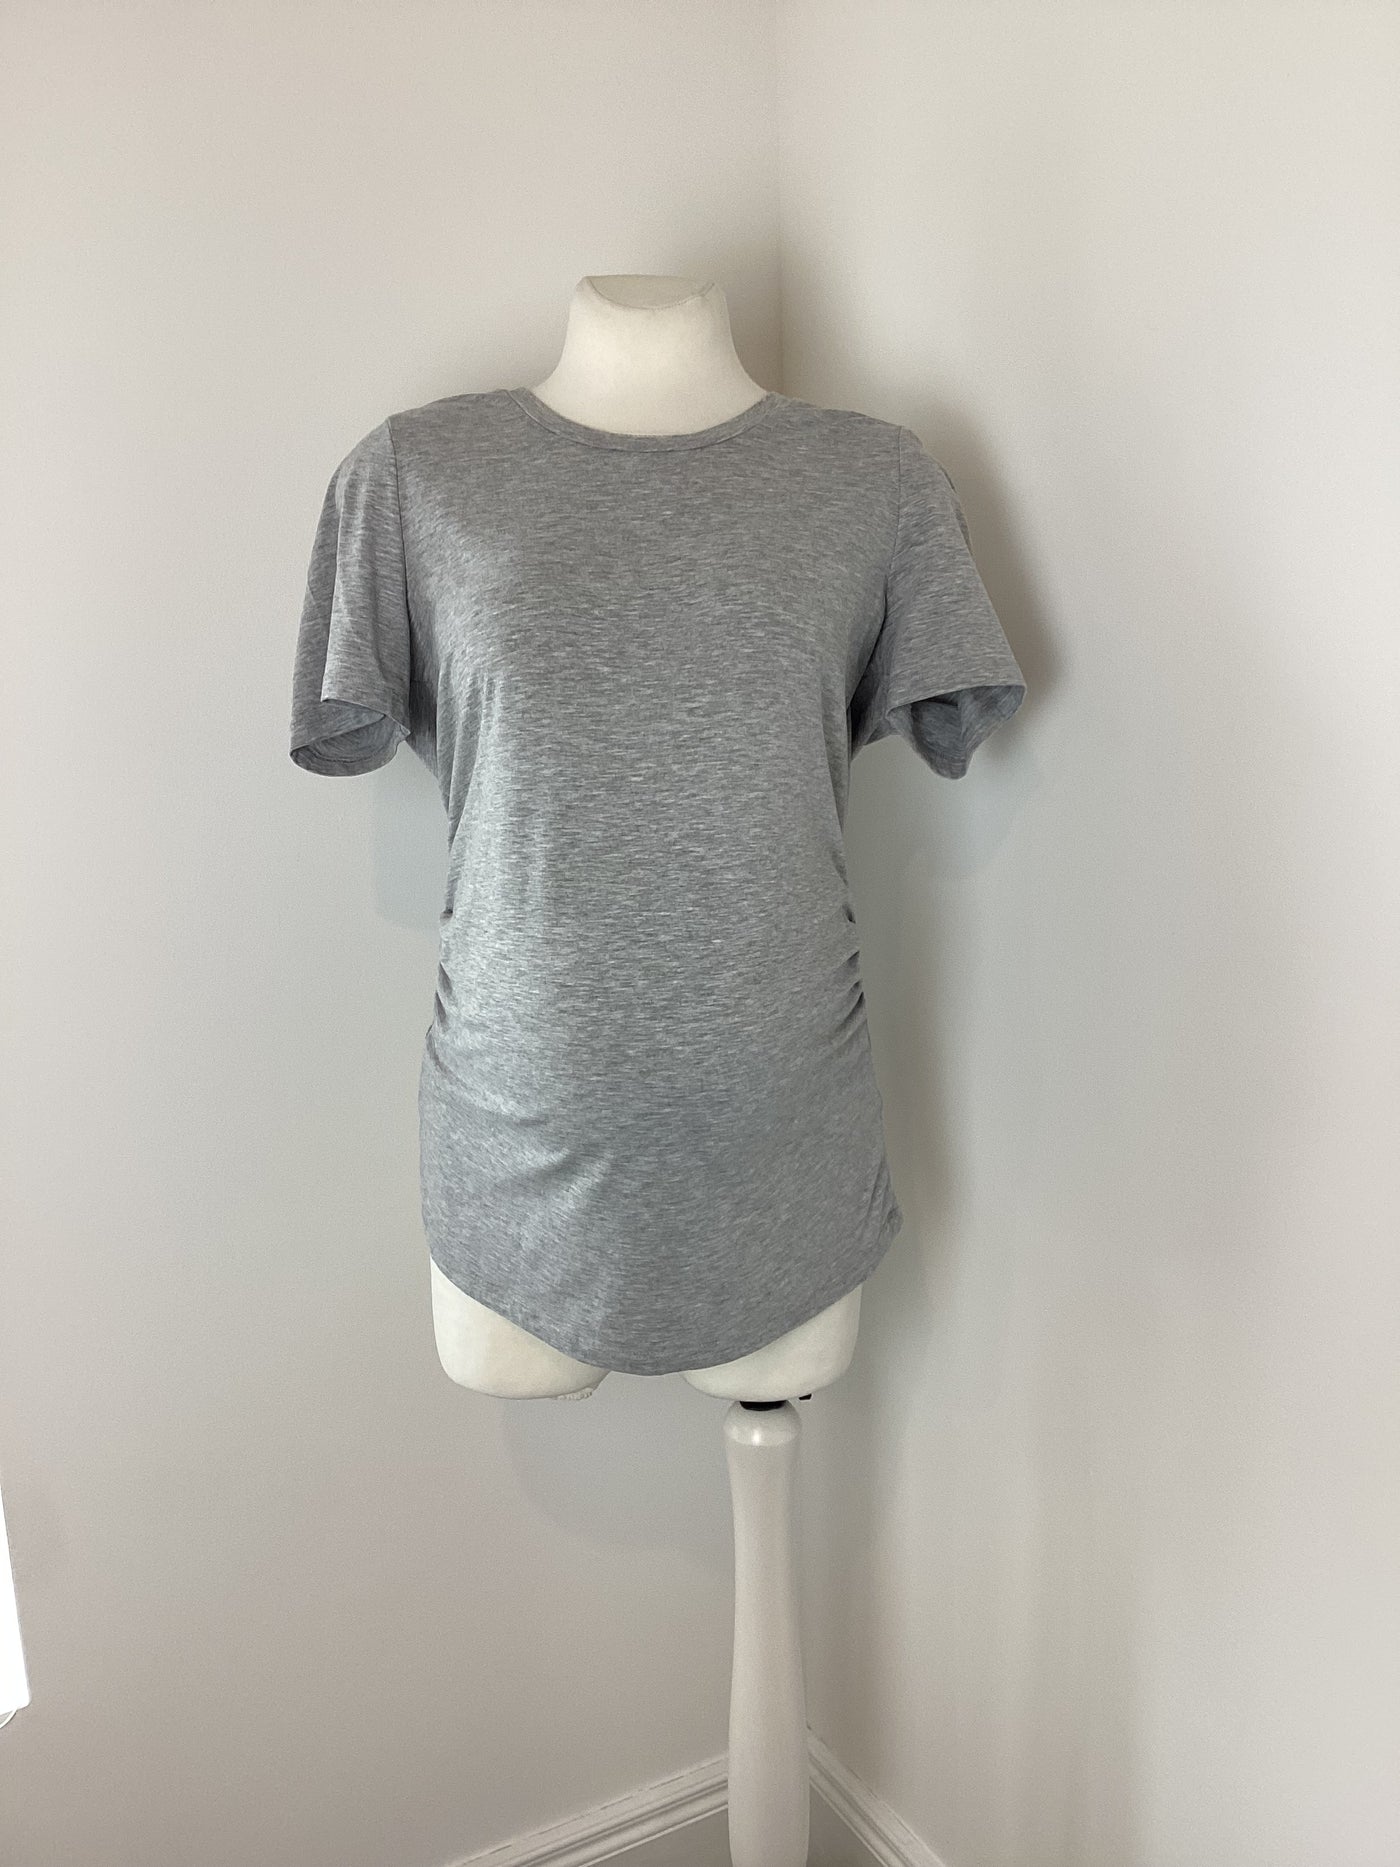 George Maternity grey t-shirt top - Size 18 (more like 16/18)